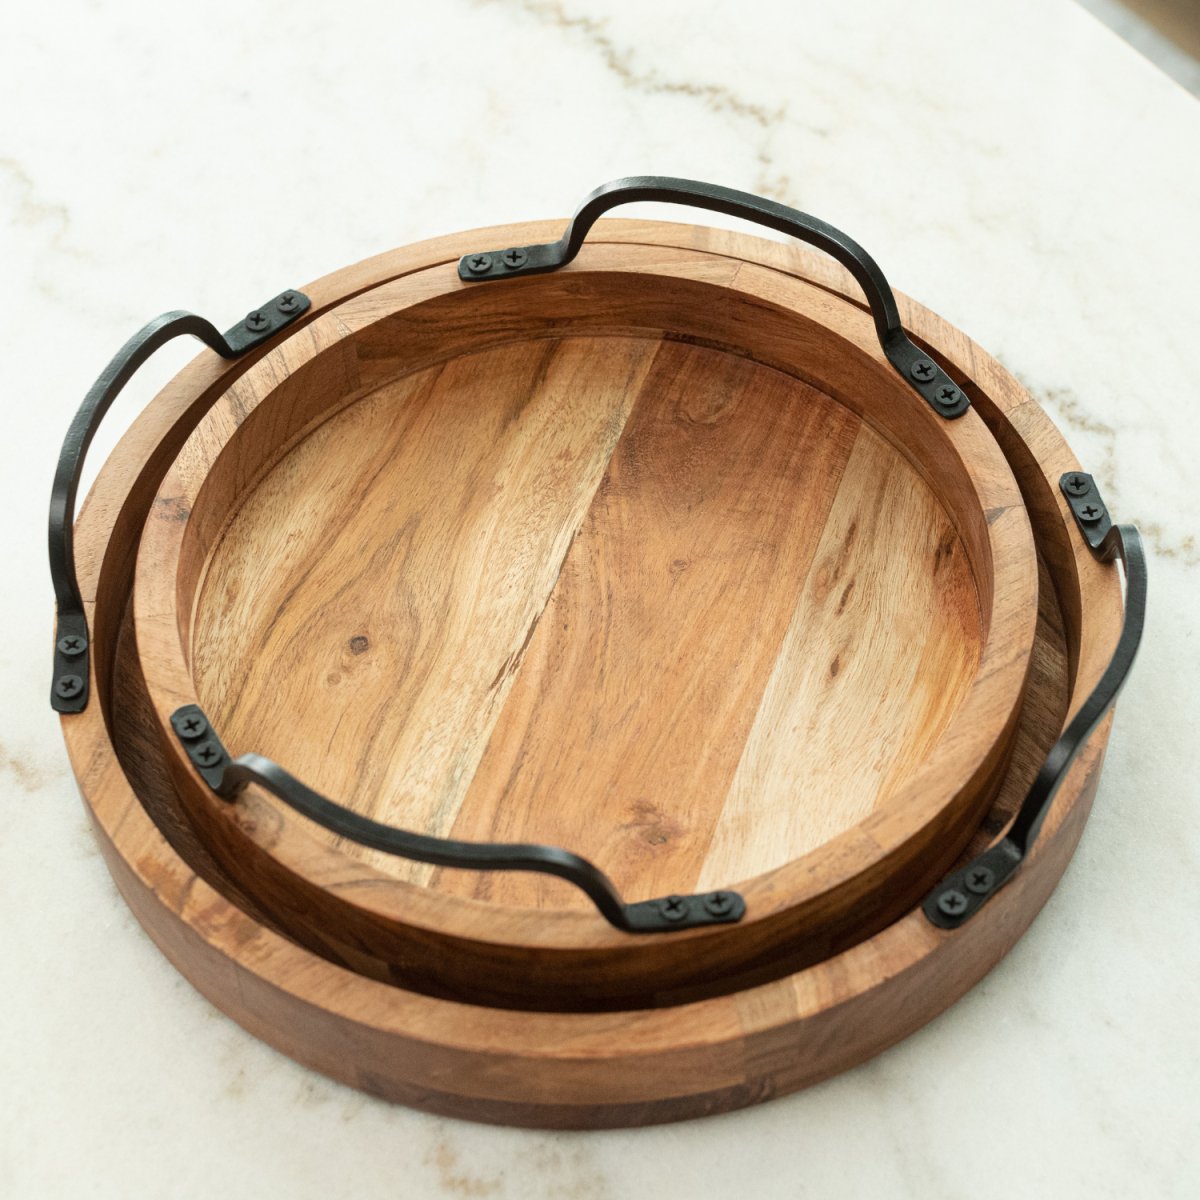 Oval Wooden Serving Tray with Handles, Decorative Platter for